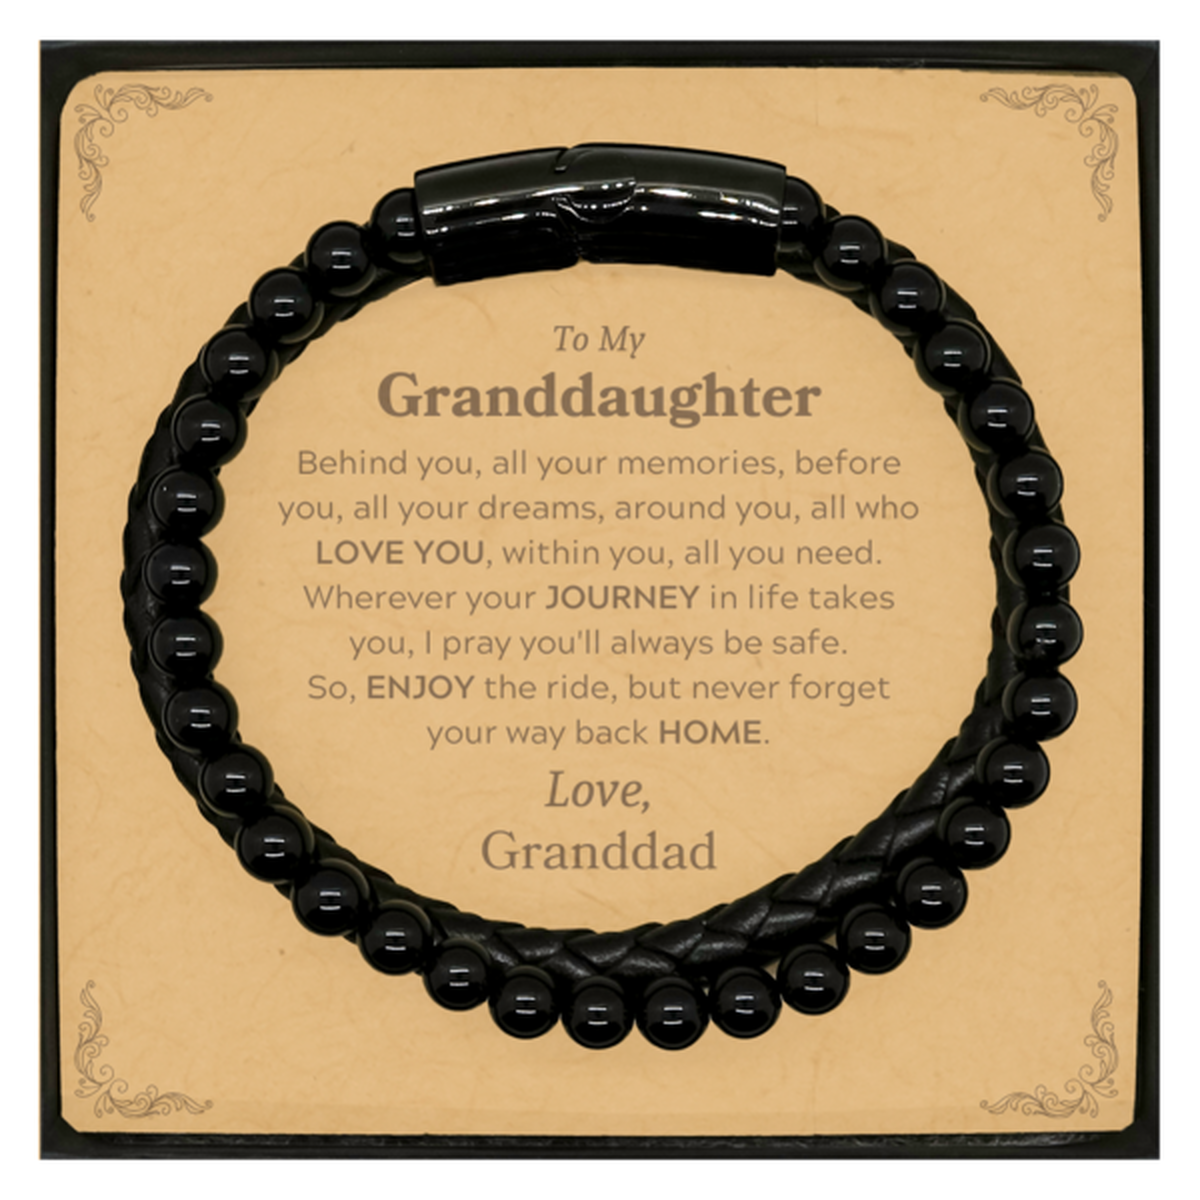 To My Granddaughter Graduation Gifts from Granddad, Granddaughter Stone Leather Bracelets Christmas Birthday Gifts for Granddaughter Behind you, all your memories, before you, all your dreams. Love, Granddad